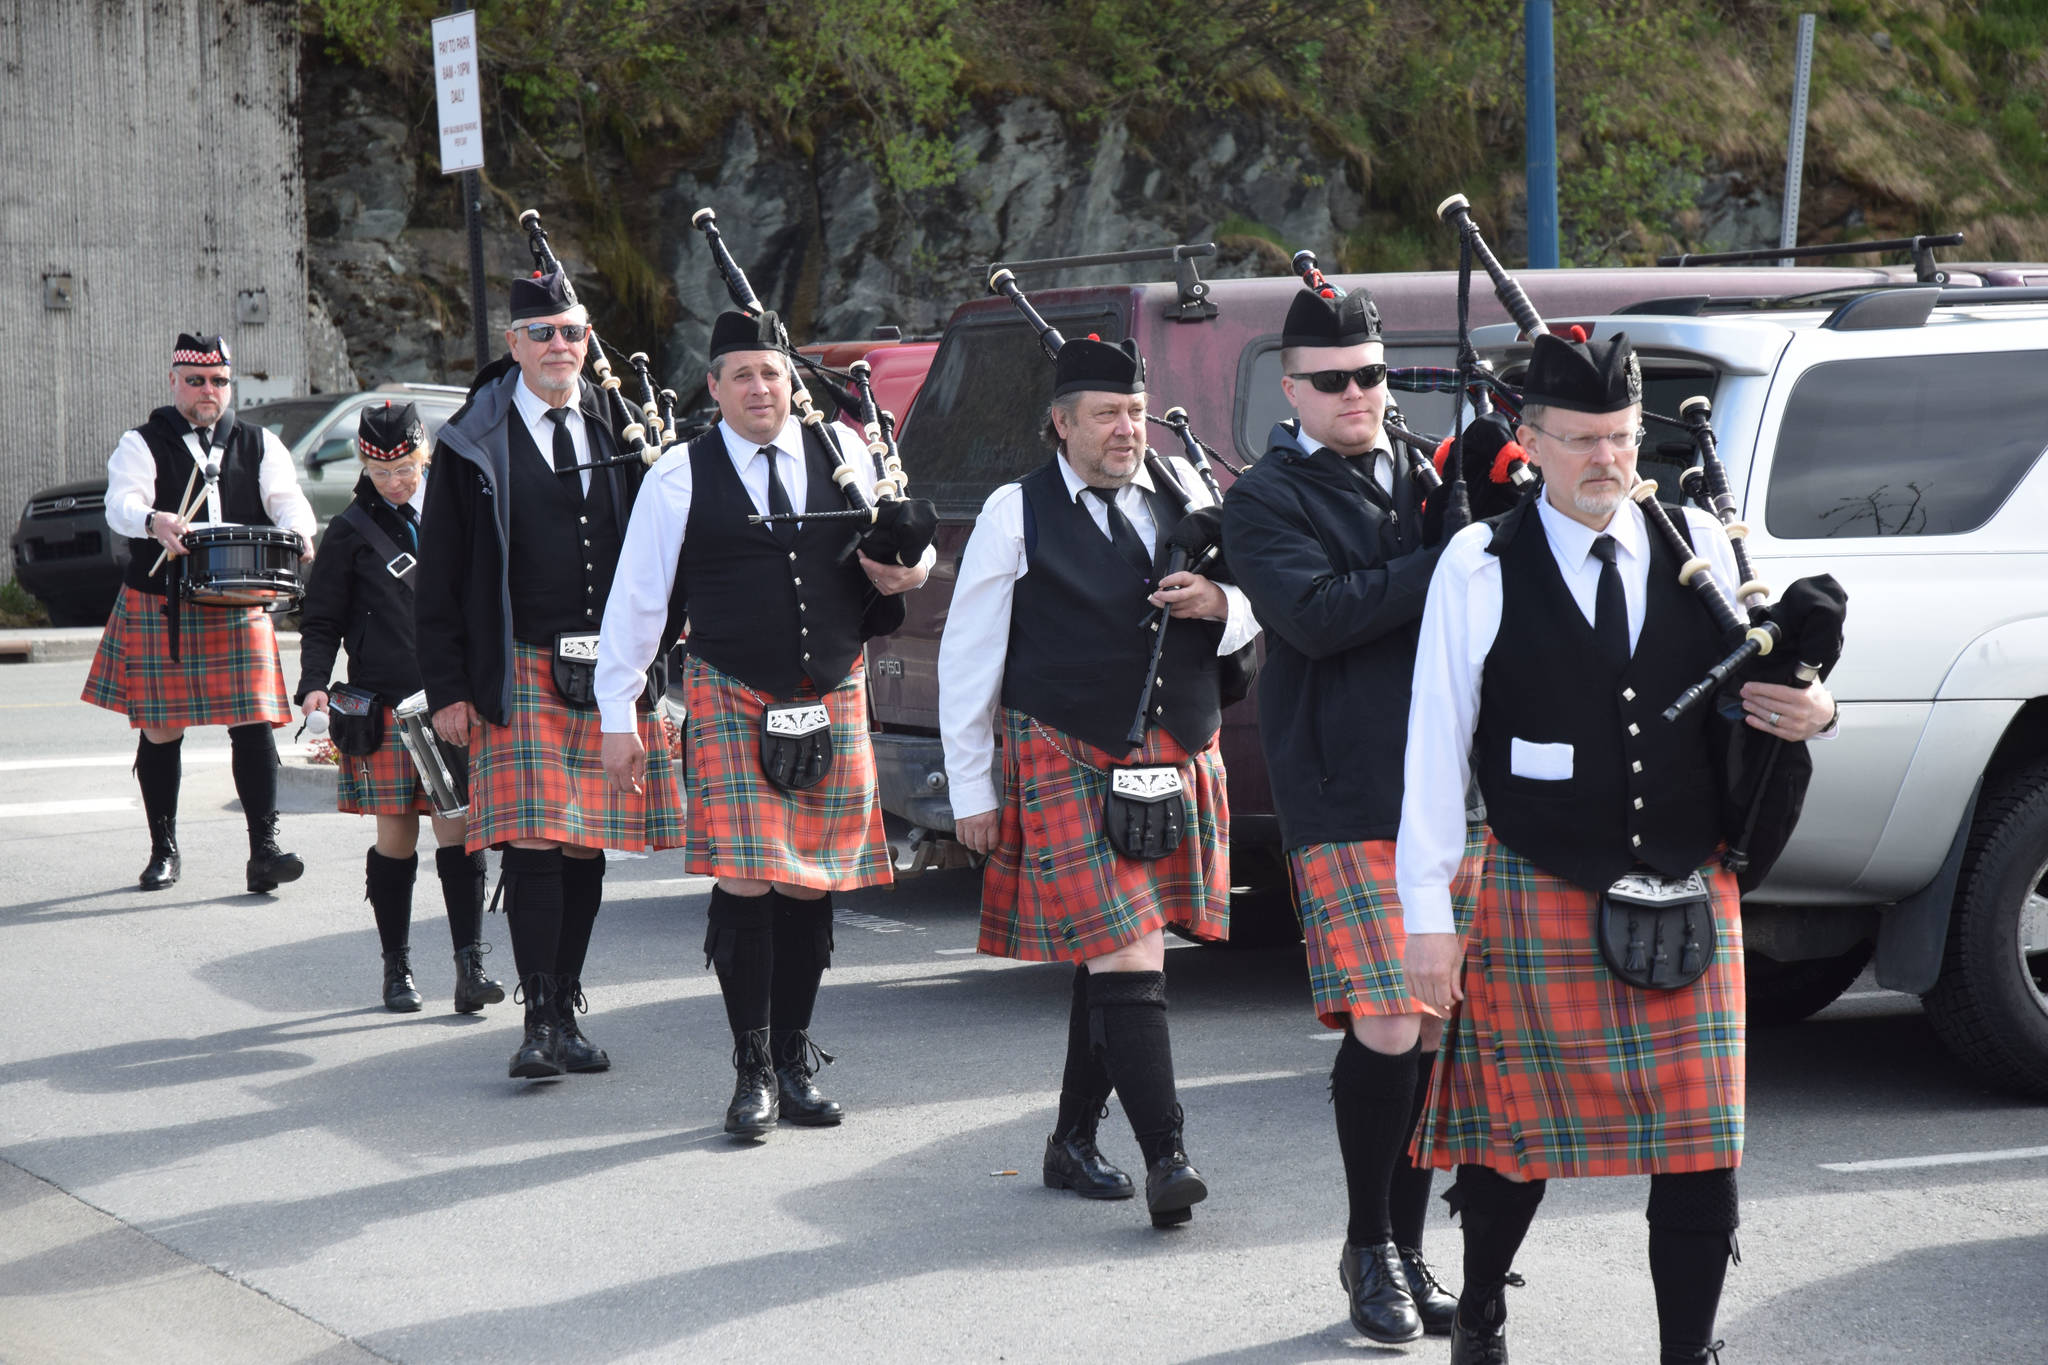 The City of Juneau Pipe Band arrive at the Blessing of the Fleet on Saturday, May 6, at the Commercial Fishermen’s Memorial. (Kevin Gullufsen | Juneau Empire)